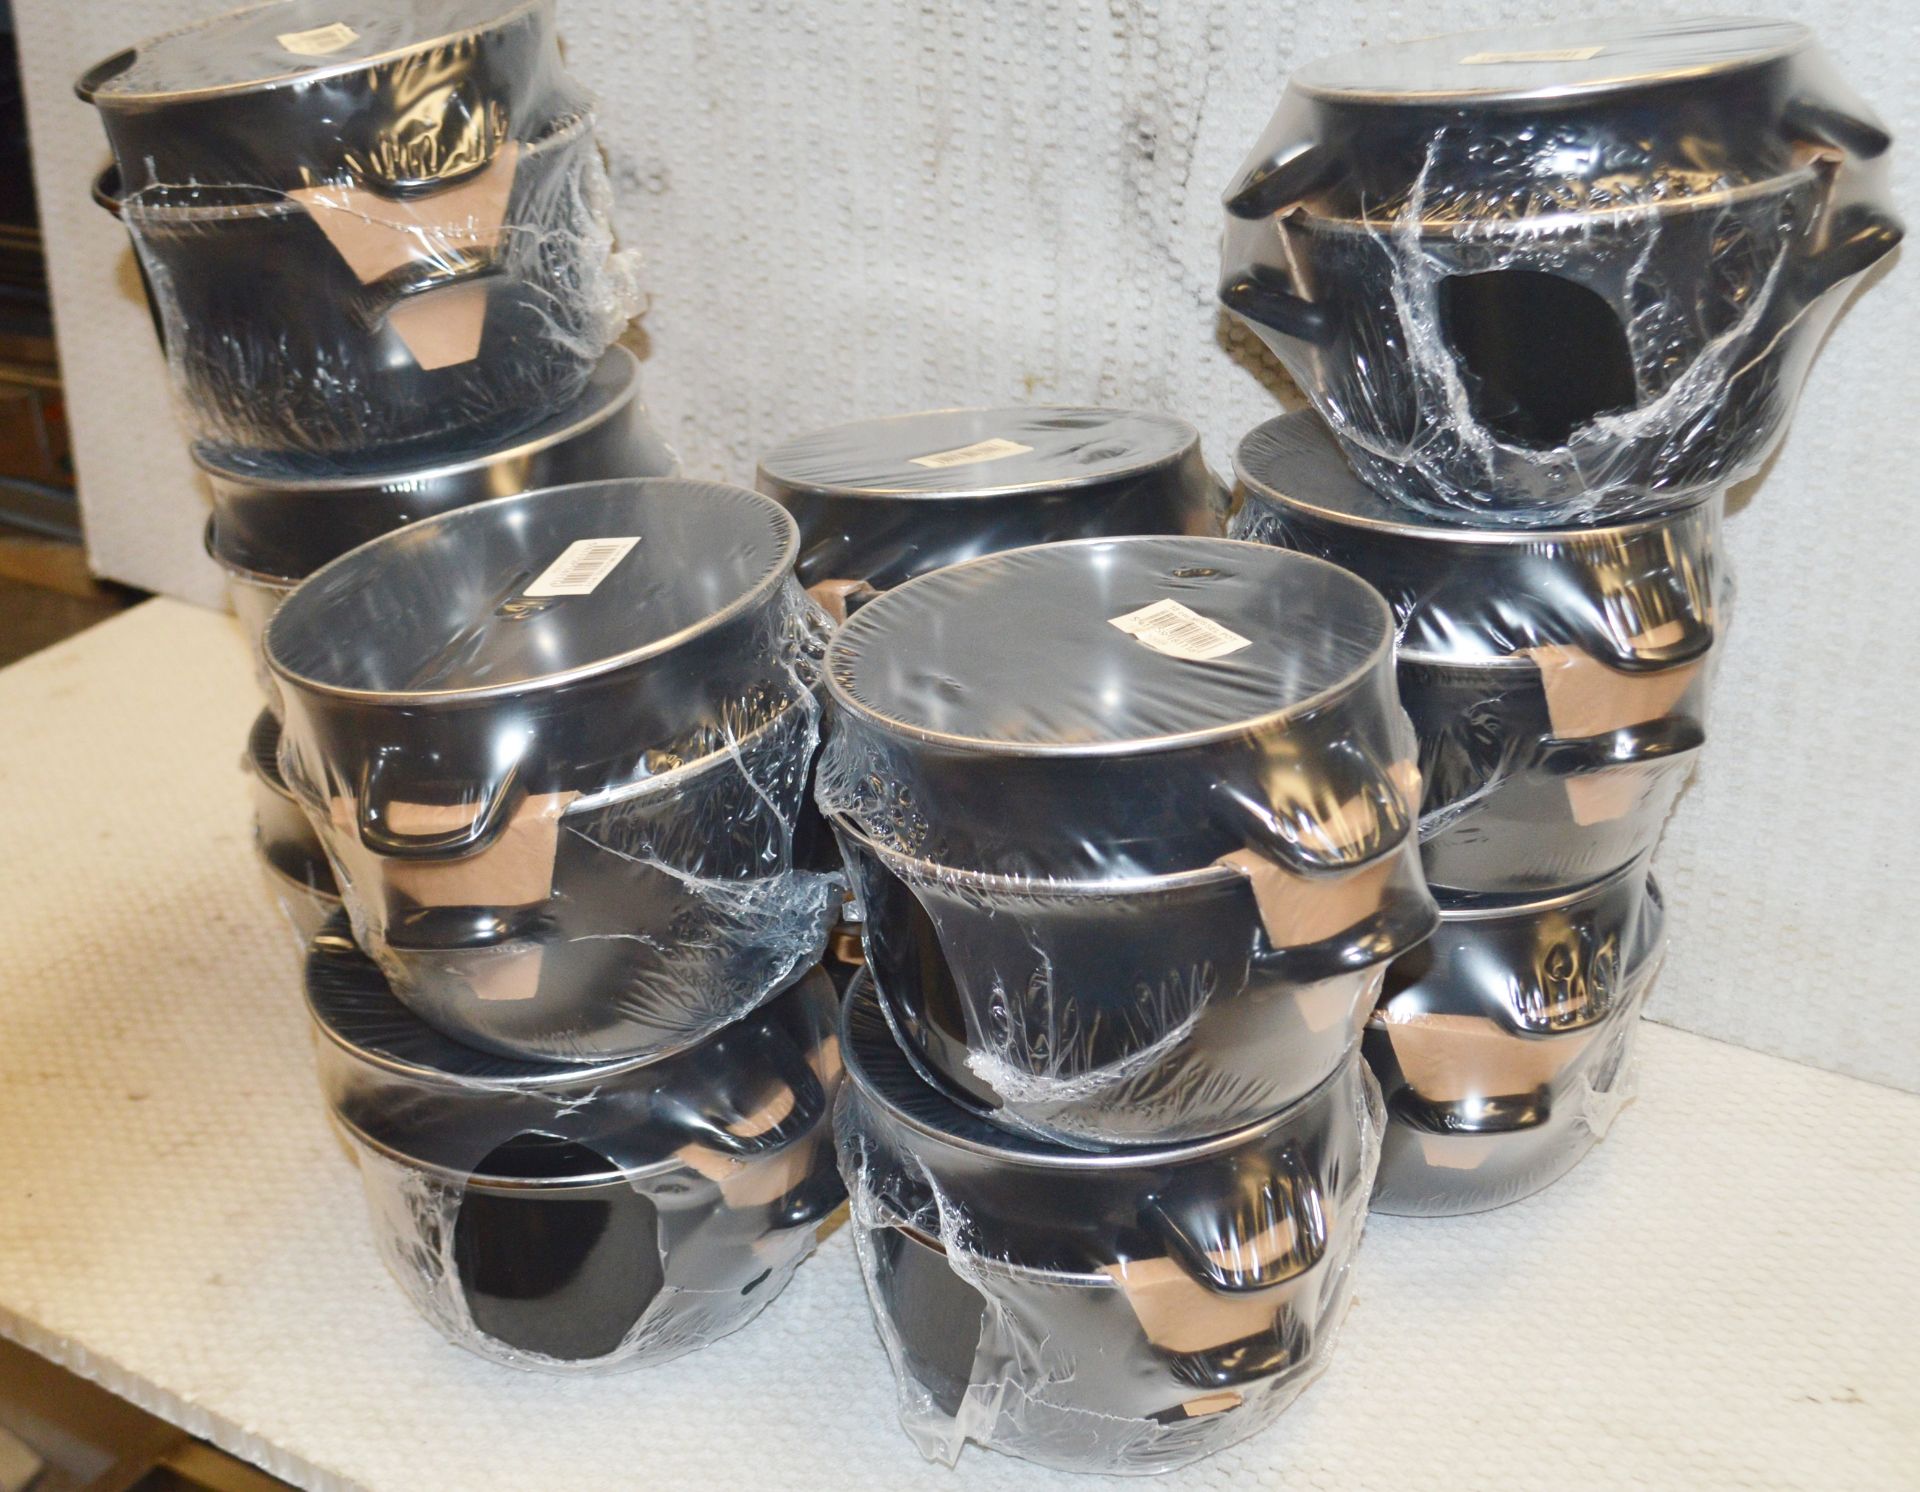 12 x Mussel Serving Dish Sets in Black - New and Unused - Recently Removed From a Commercial - Image 3 of 4